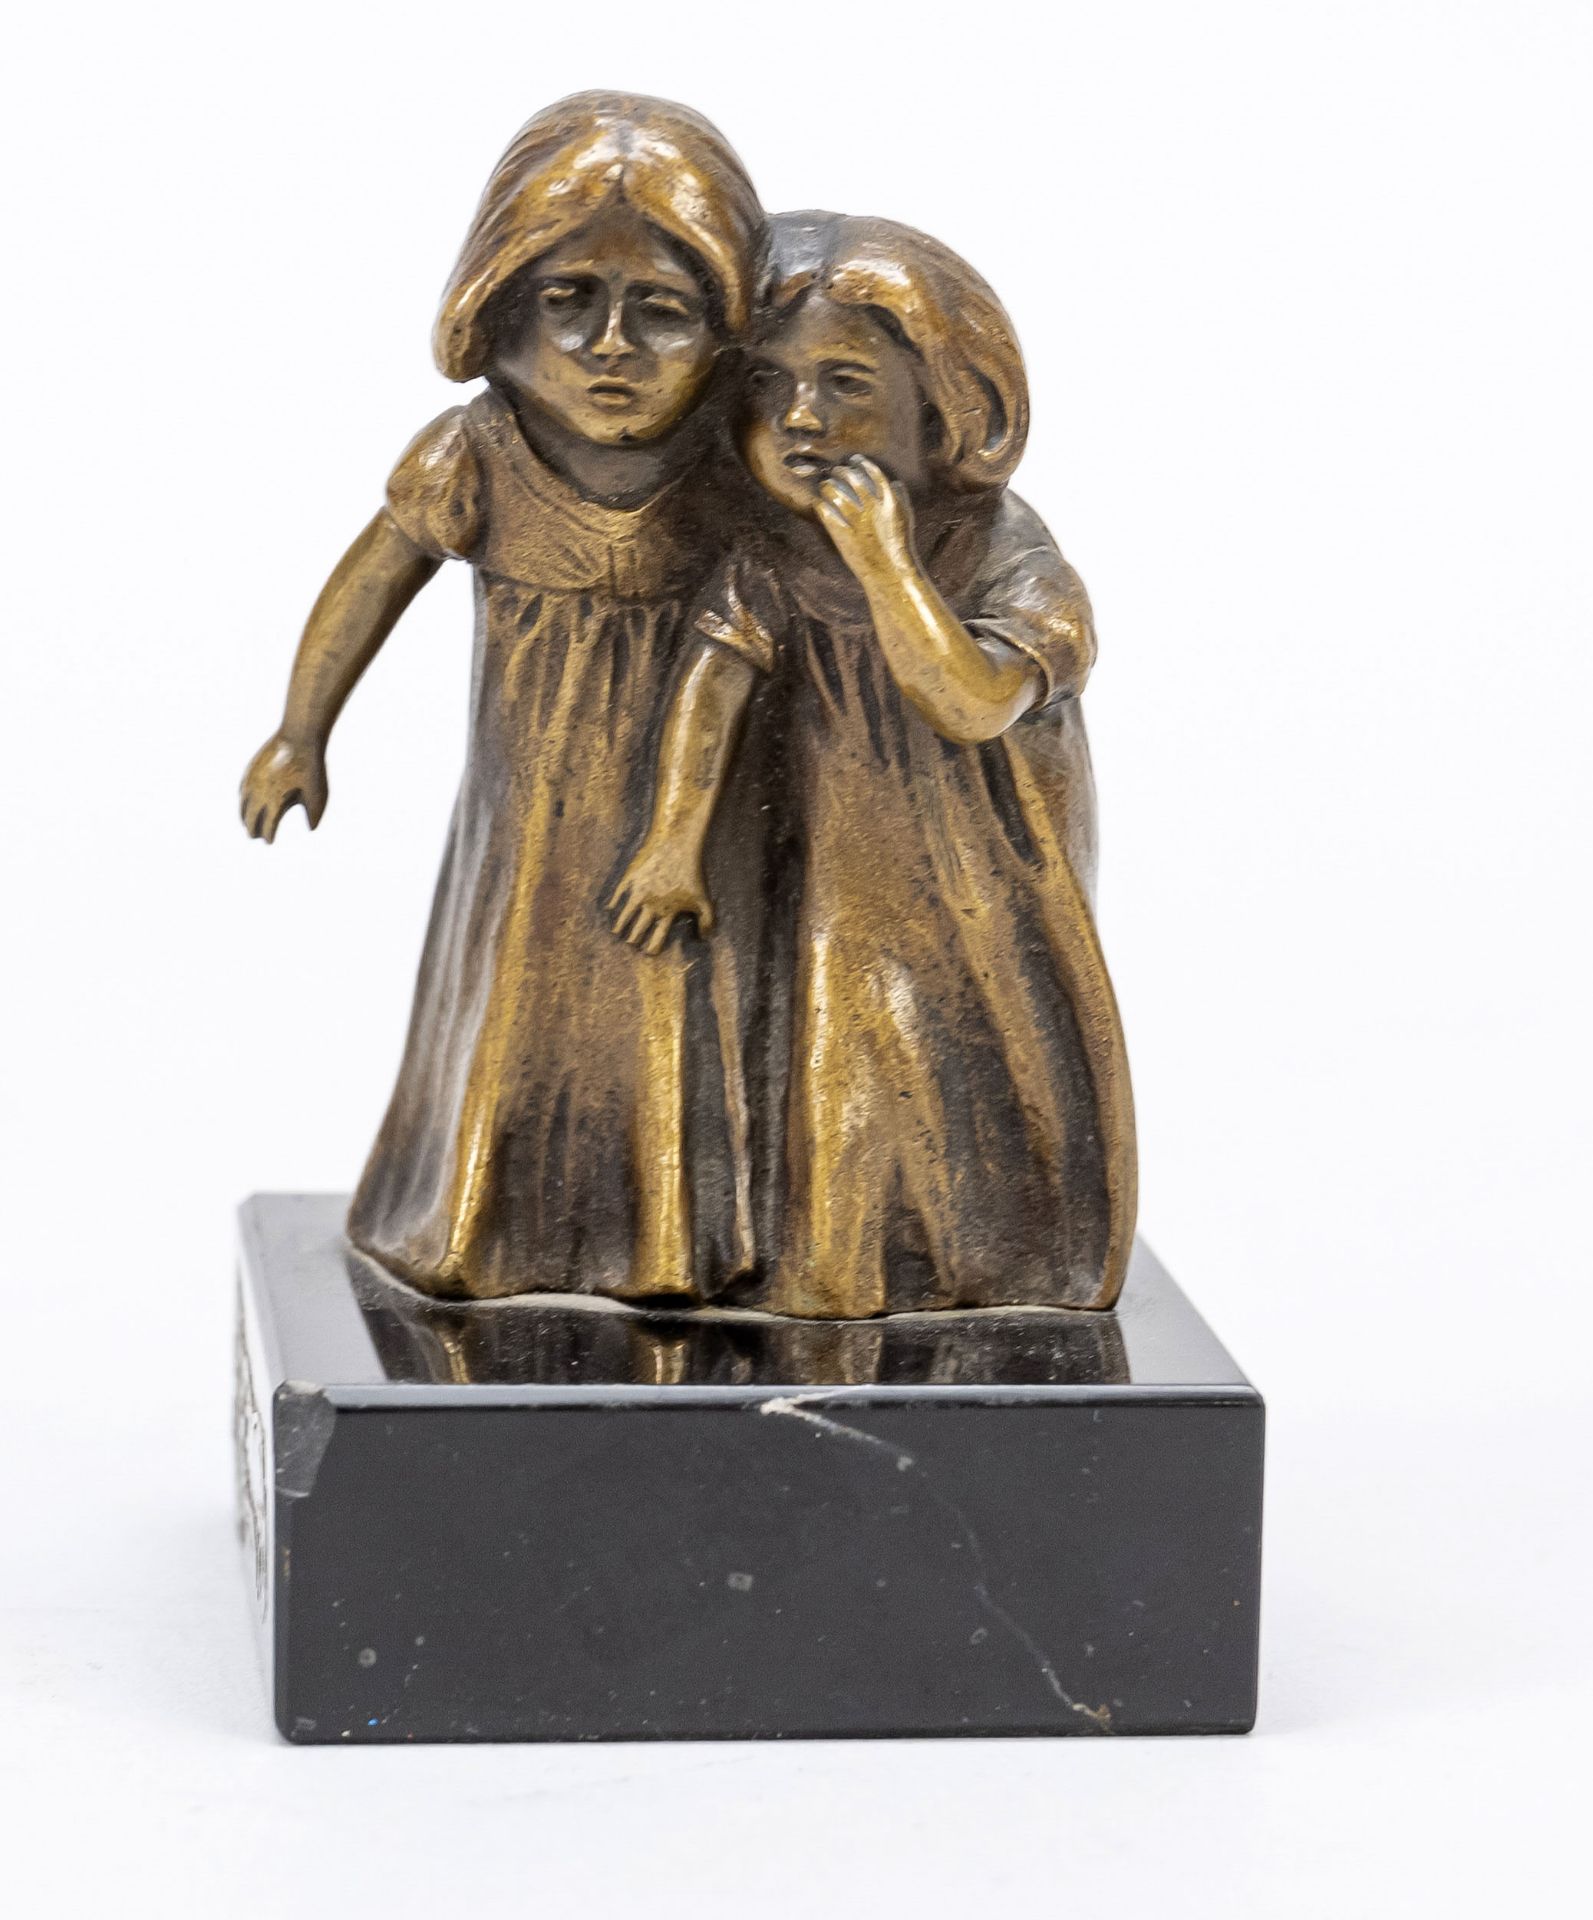 20th century sculptor, two sisters, small figure of two children holding each other, brownish